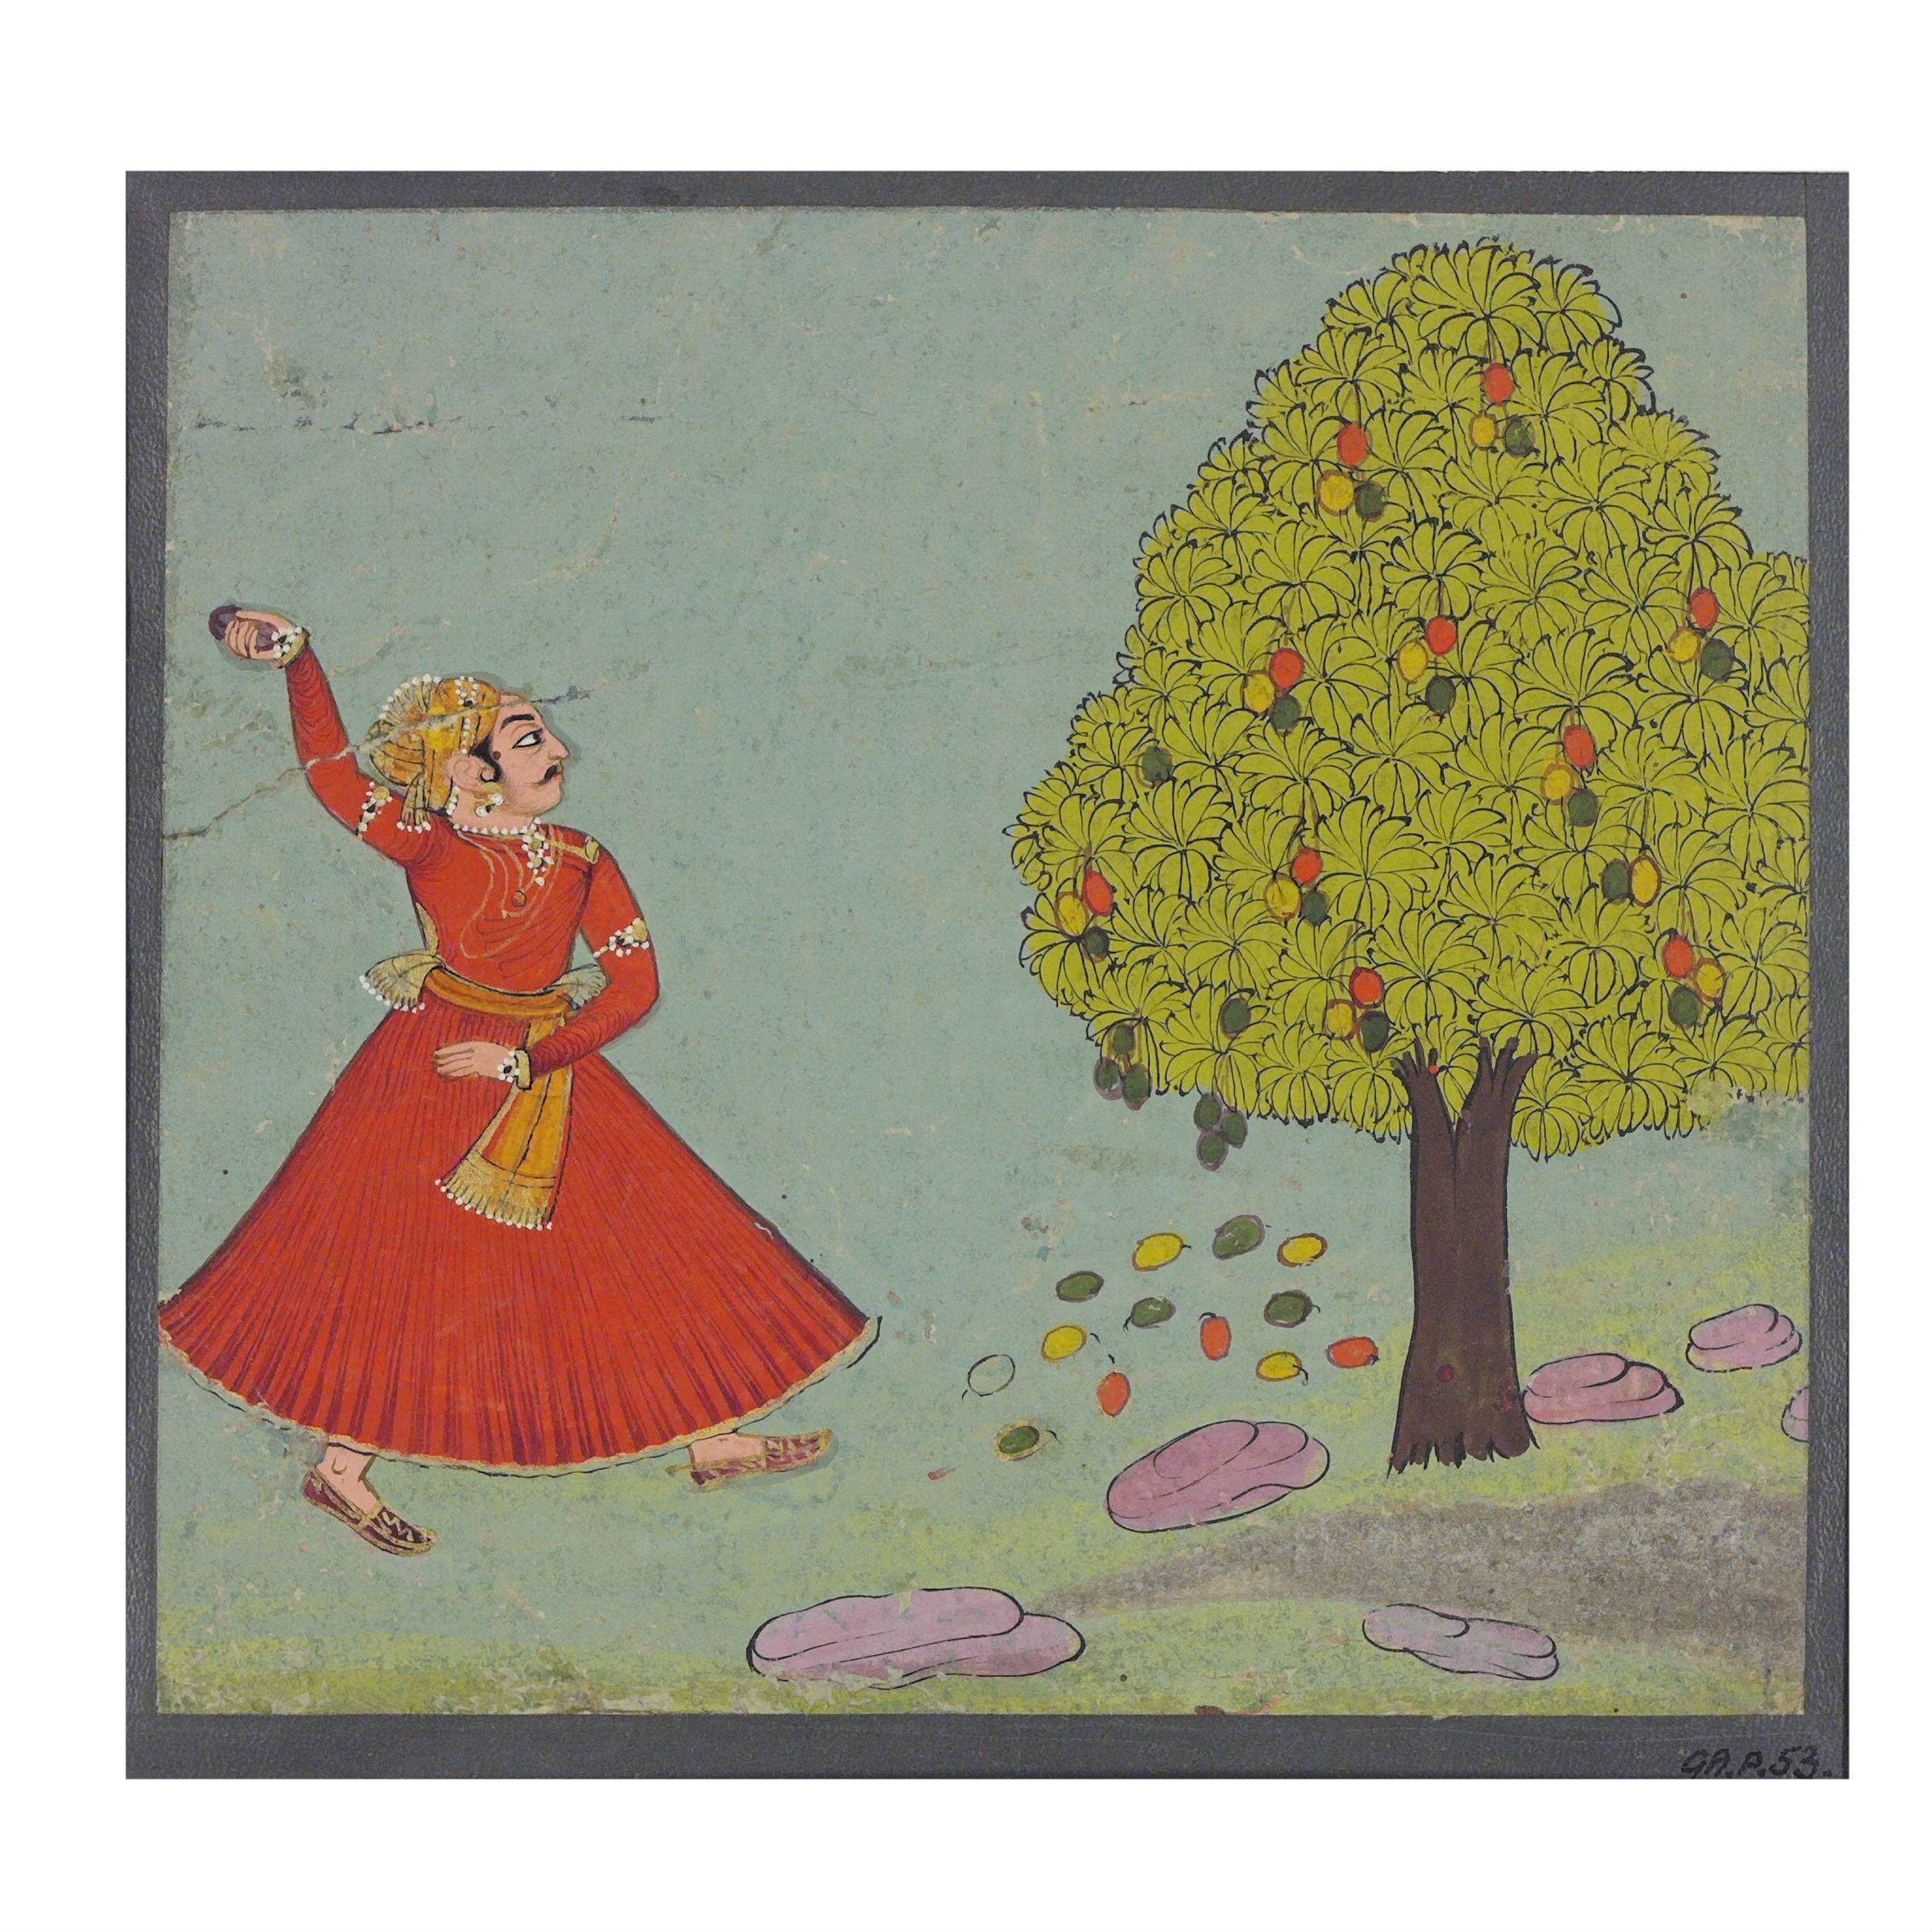 A Man Hurling a Stone at a Mango Tree, Bundi, c. 1850, Opaque watercolour onpaper, 21.6 cm, Image courtesy of Victoria and Albert Museum.